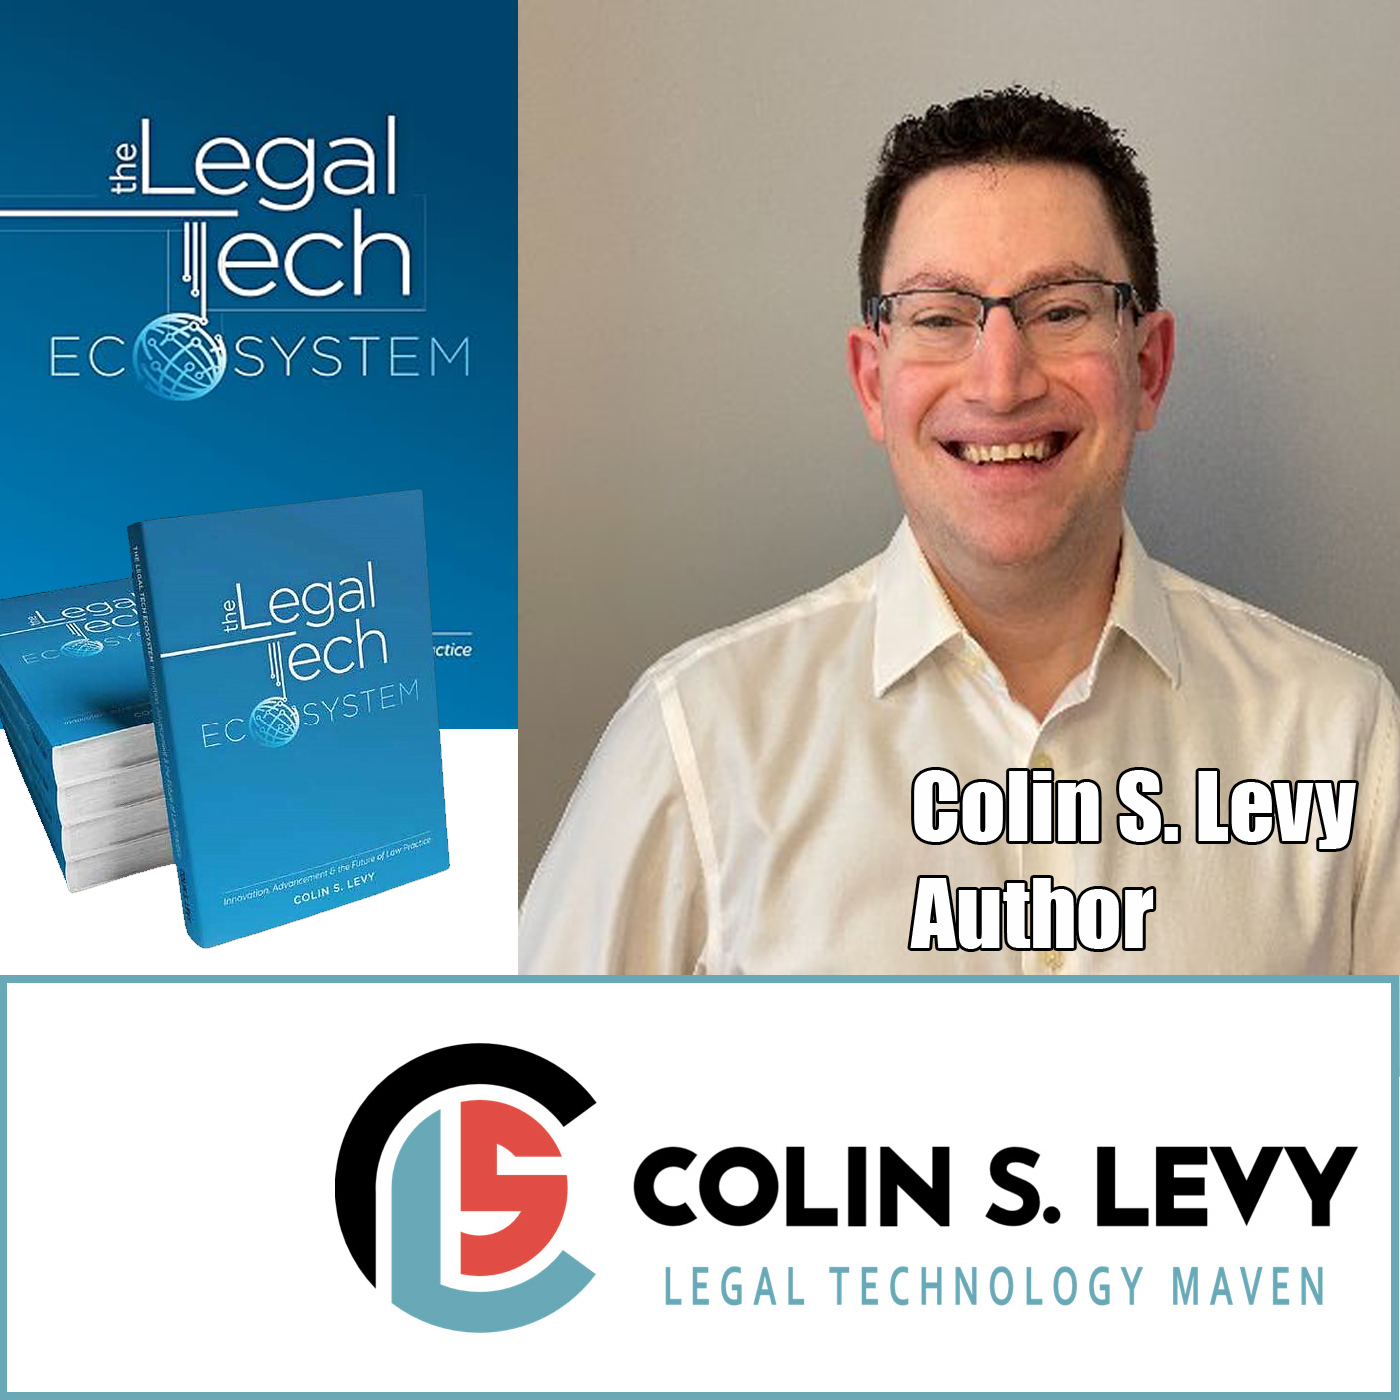 Author and Legal Tech Expert Colin S. Levy on the TechtalkRadio Show